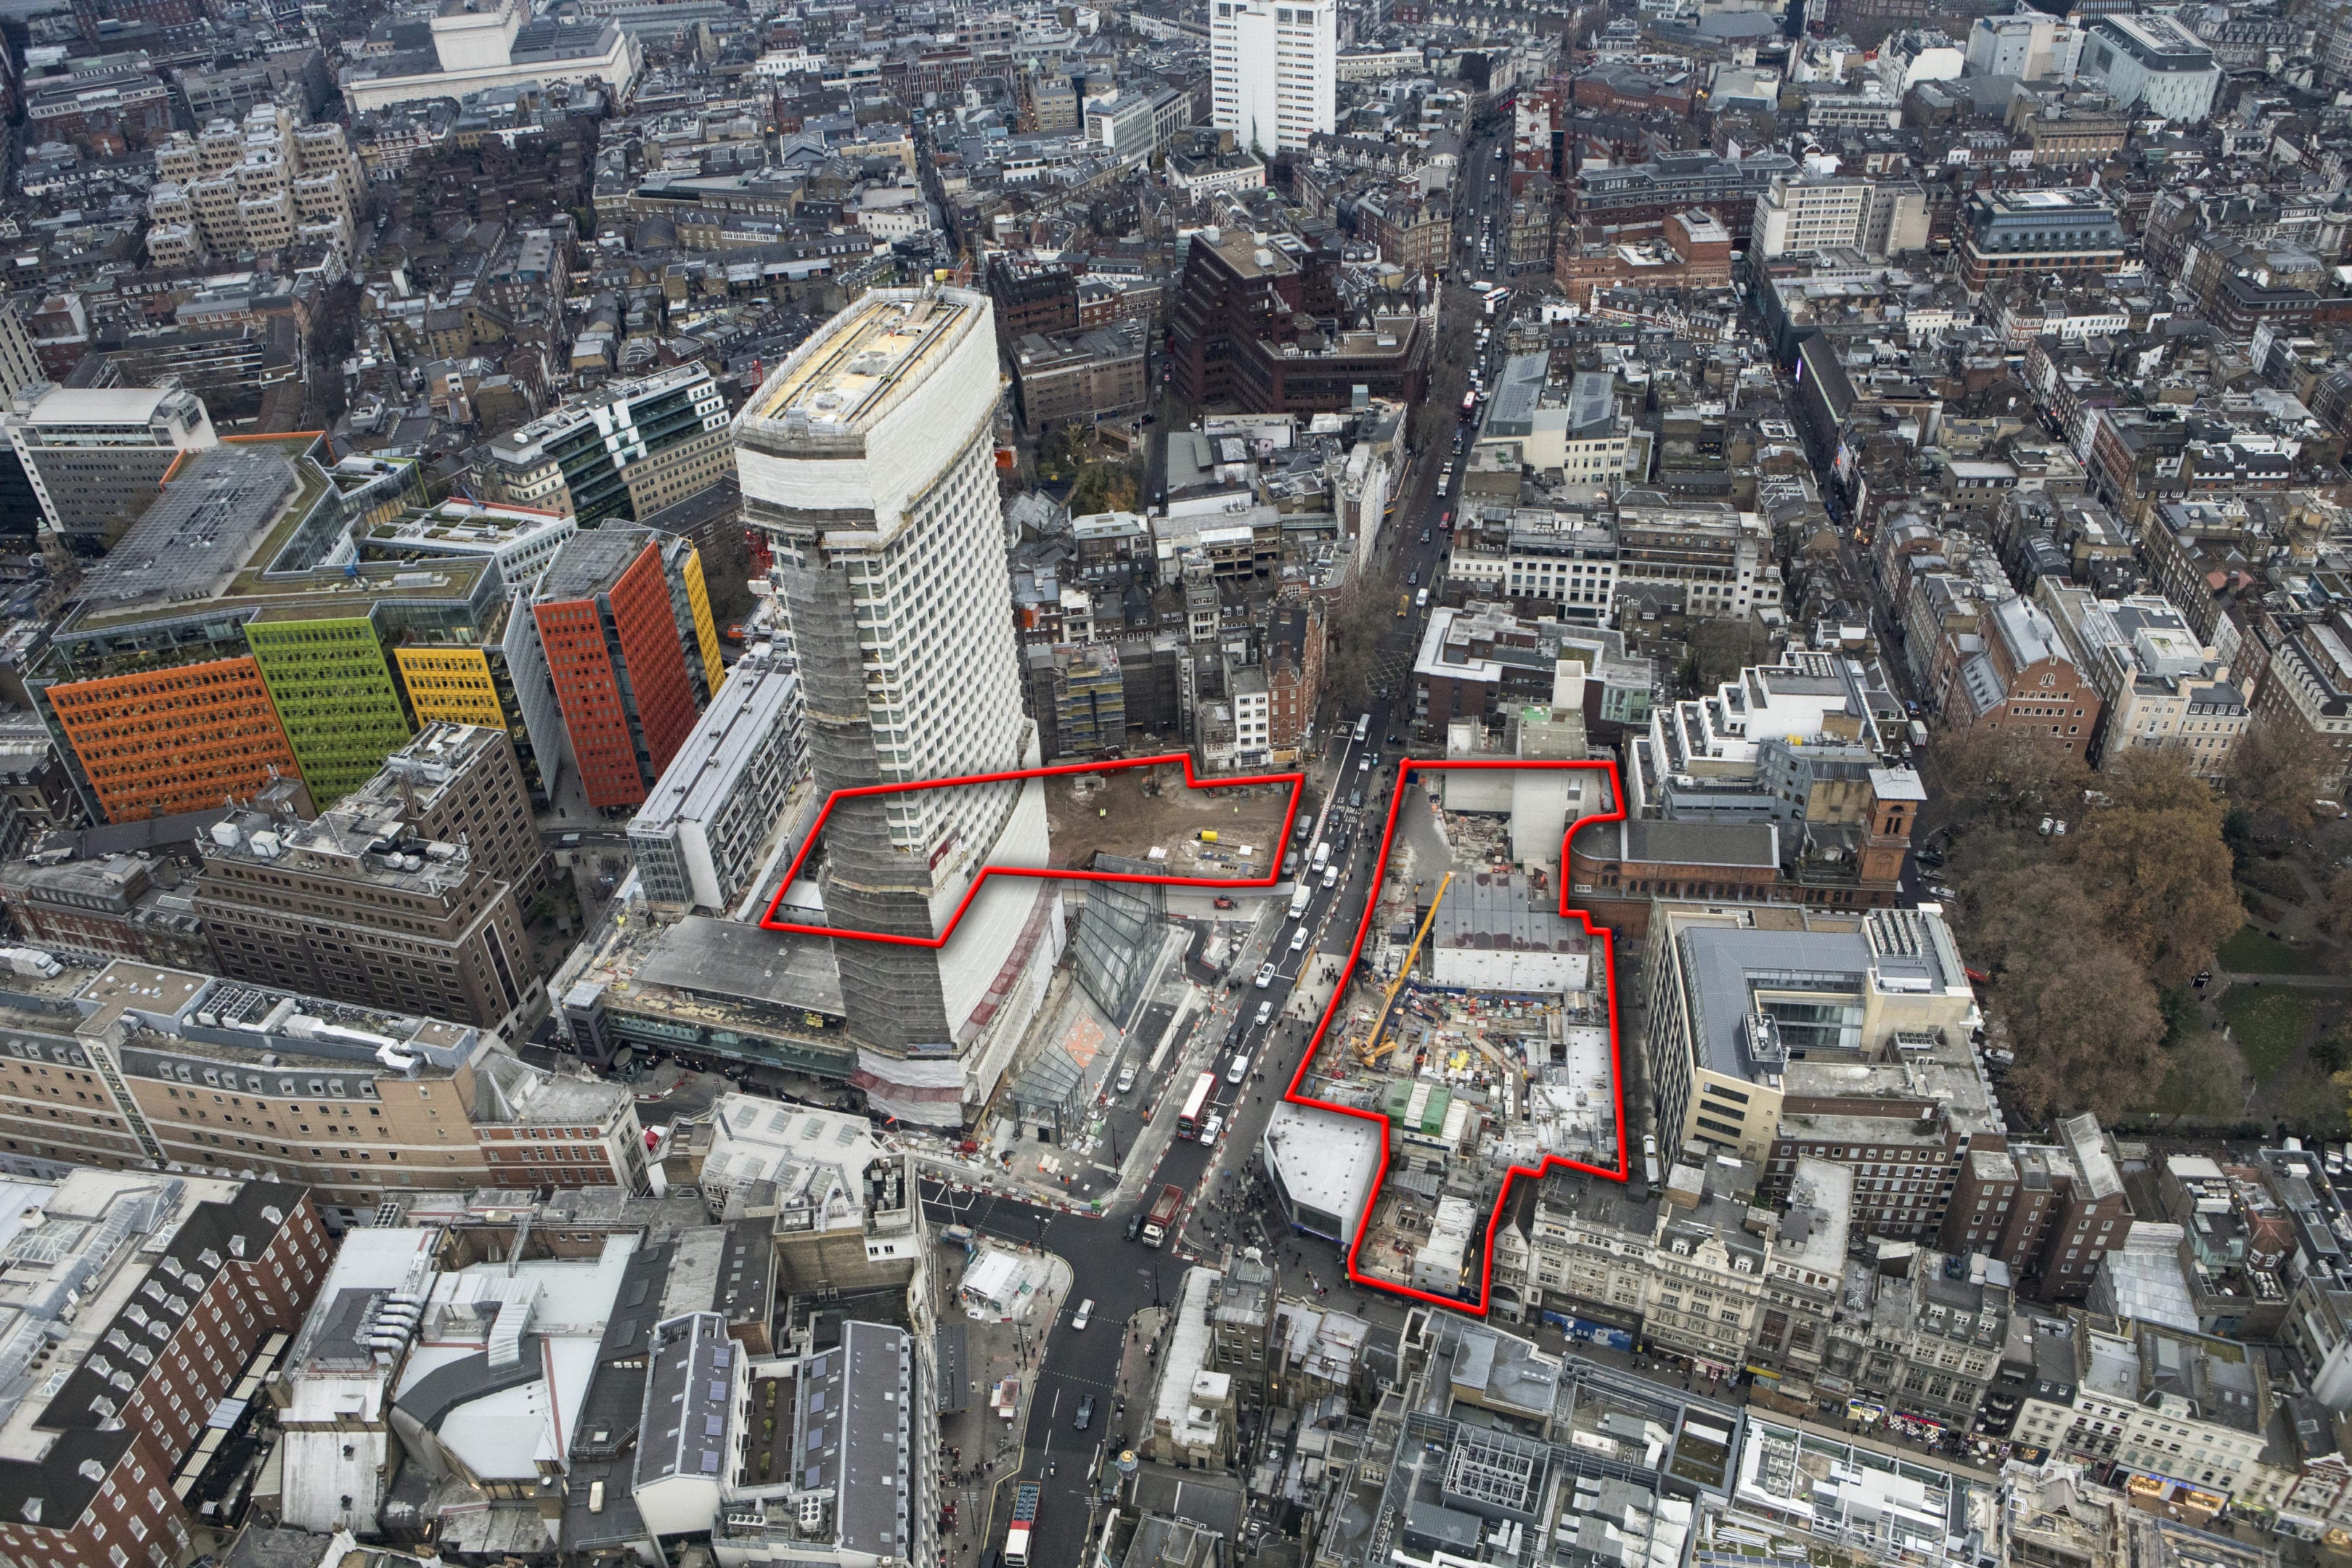 Image of Tottenham Court Rd Crossrail Project